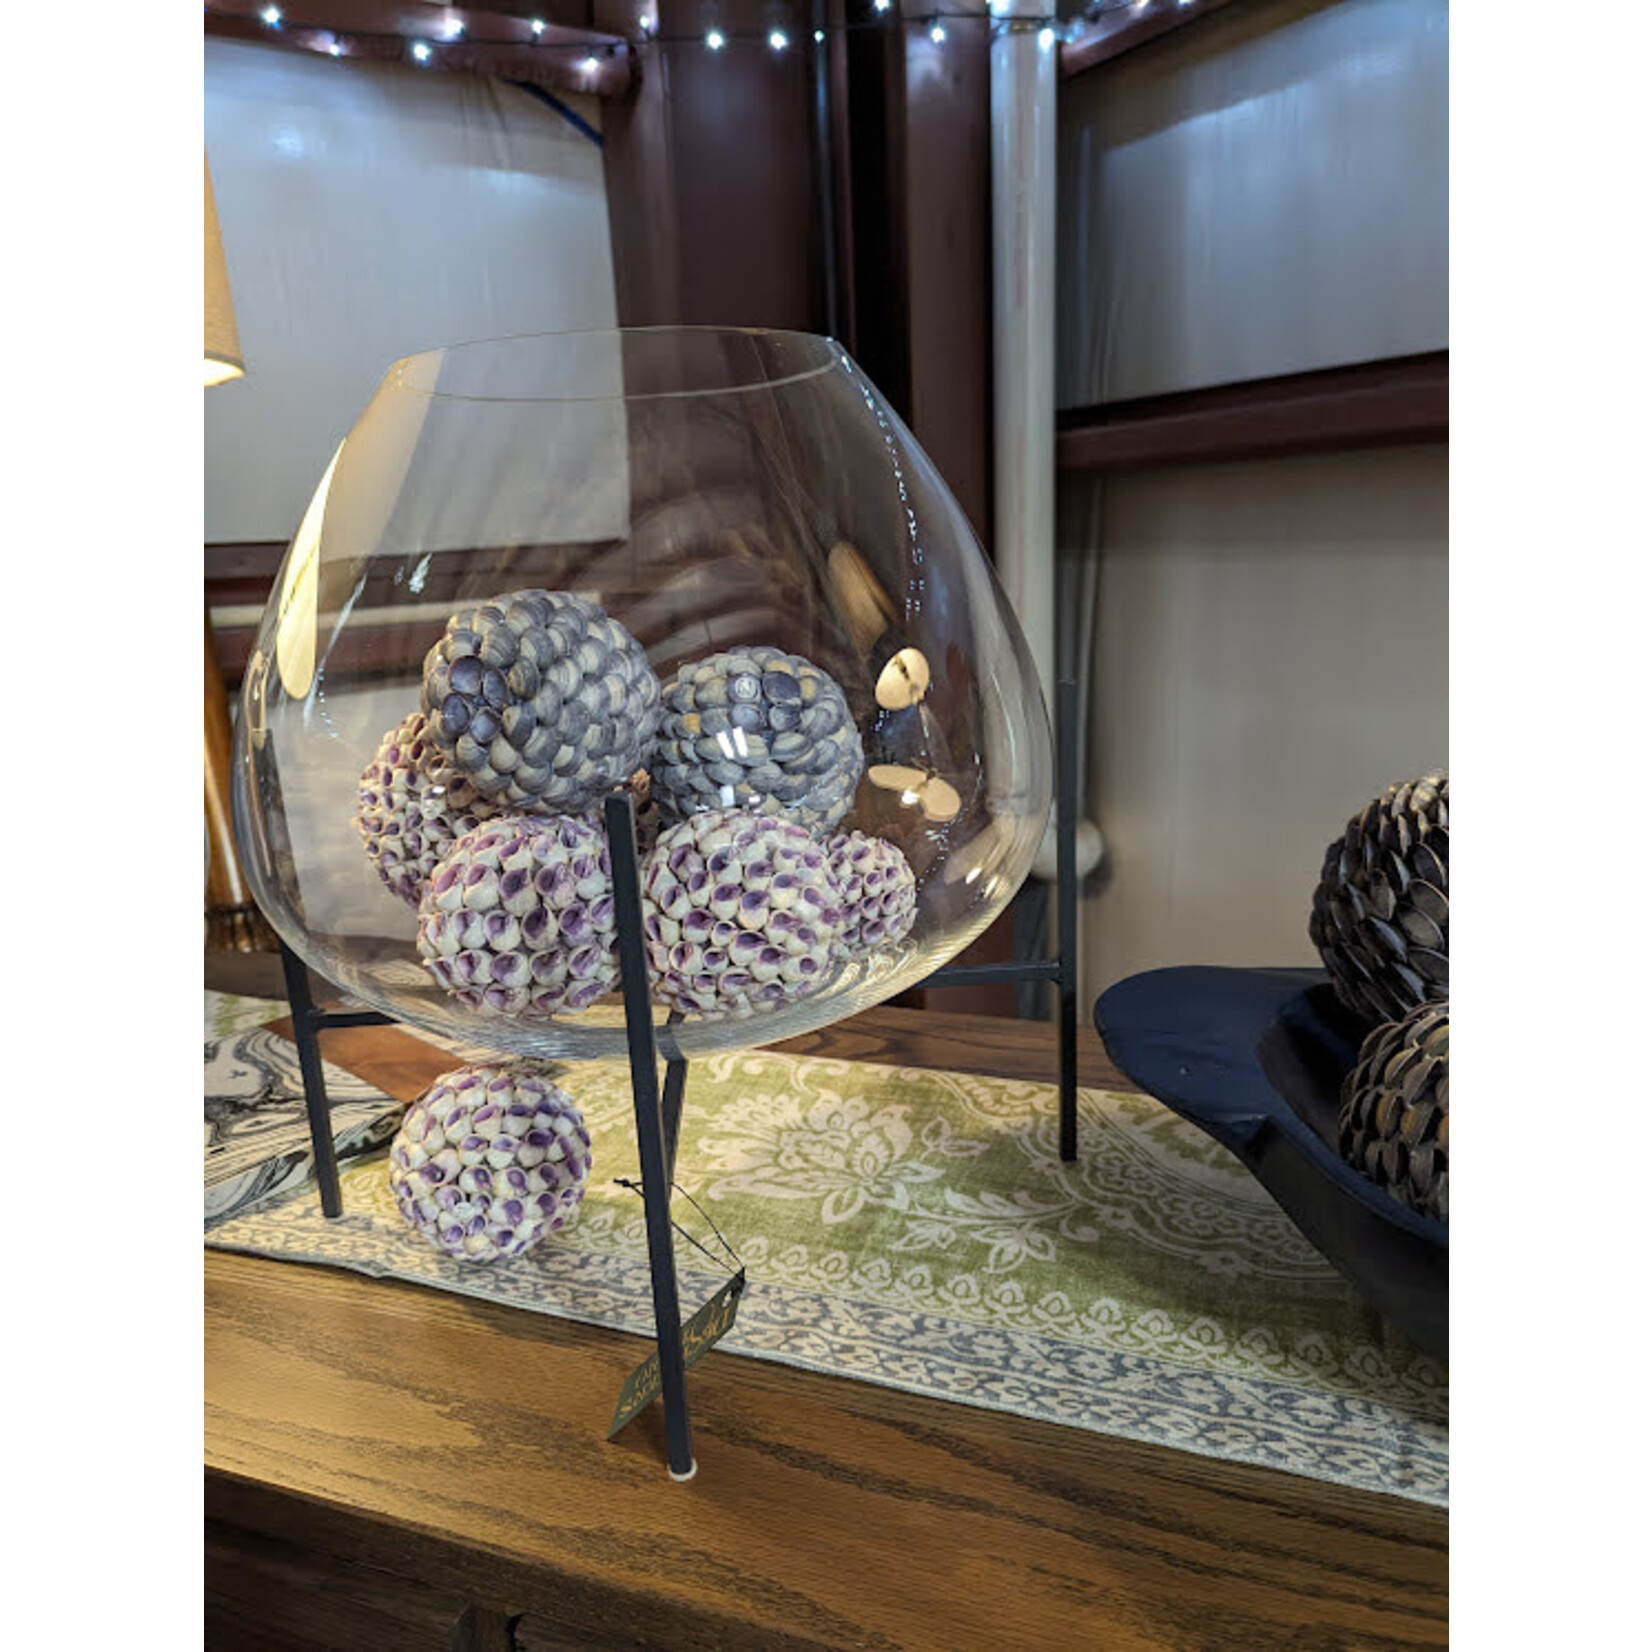 Roost Lavender Shell Sphere 2.5"